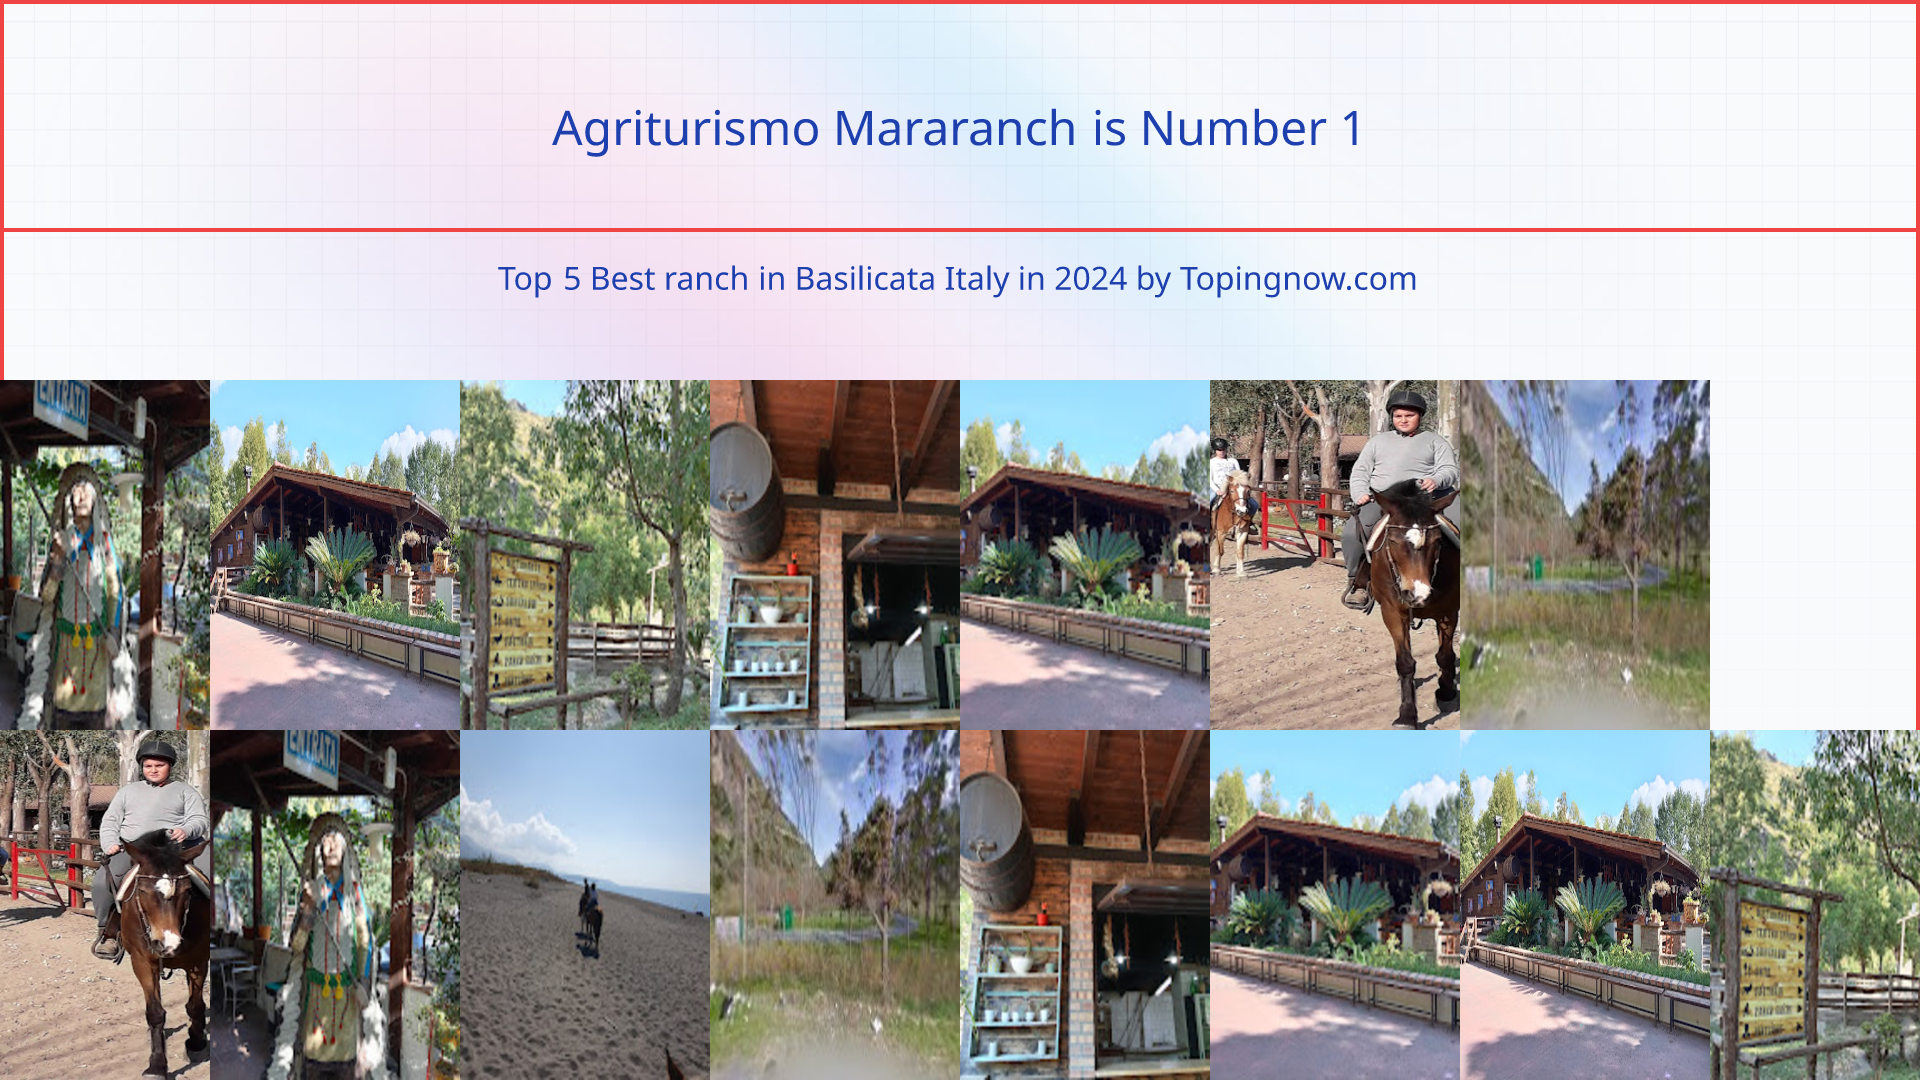 Agriturismo Mararanch: Top 5 Best ranch in Basilicata Italy in 2024